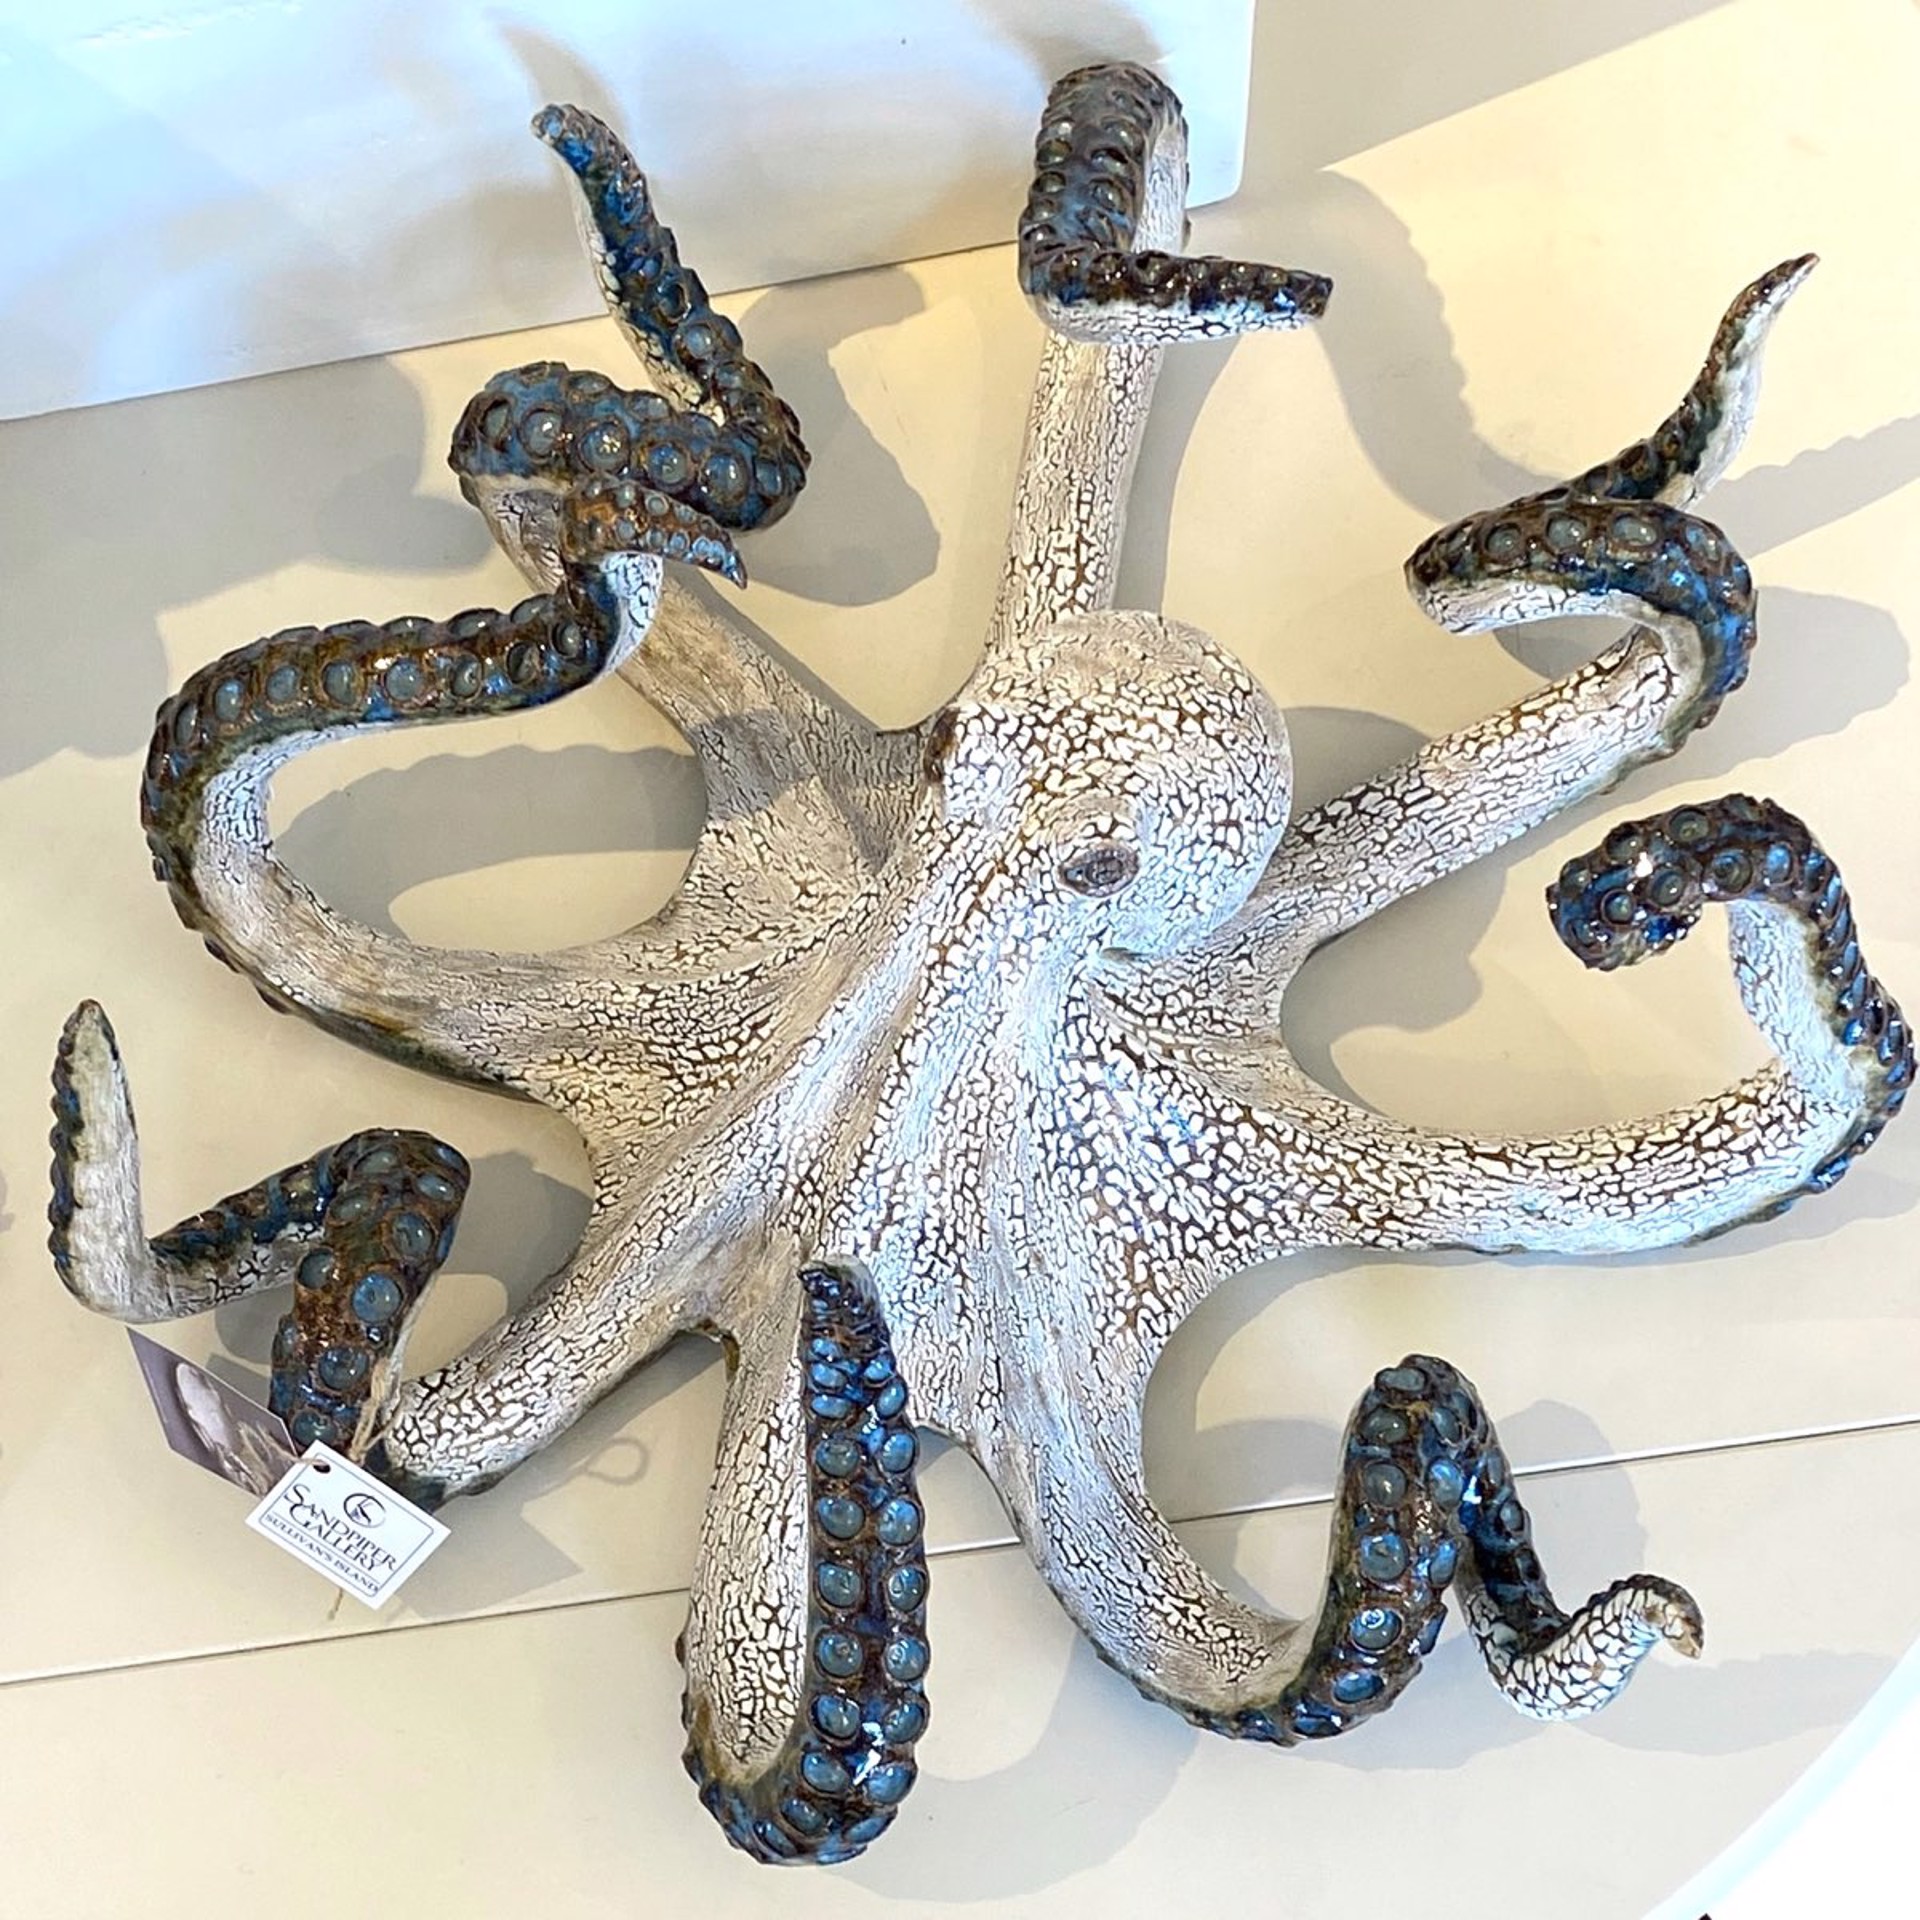 Giant Table Octopus by Shayne Greco